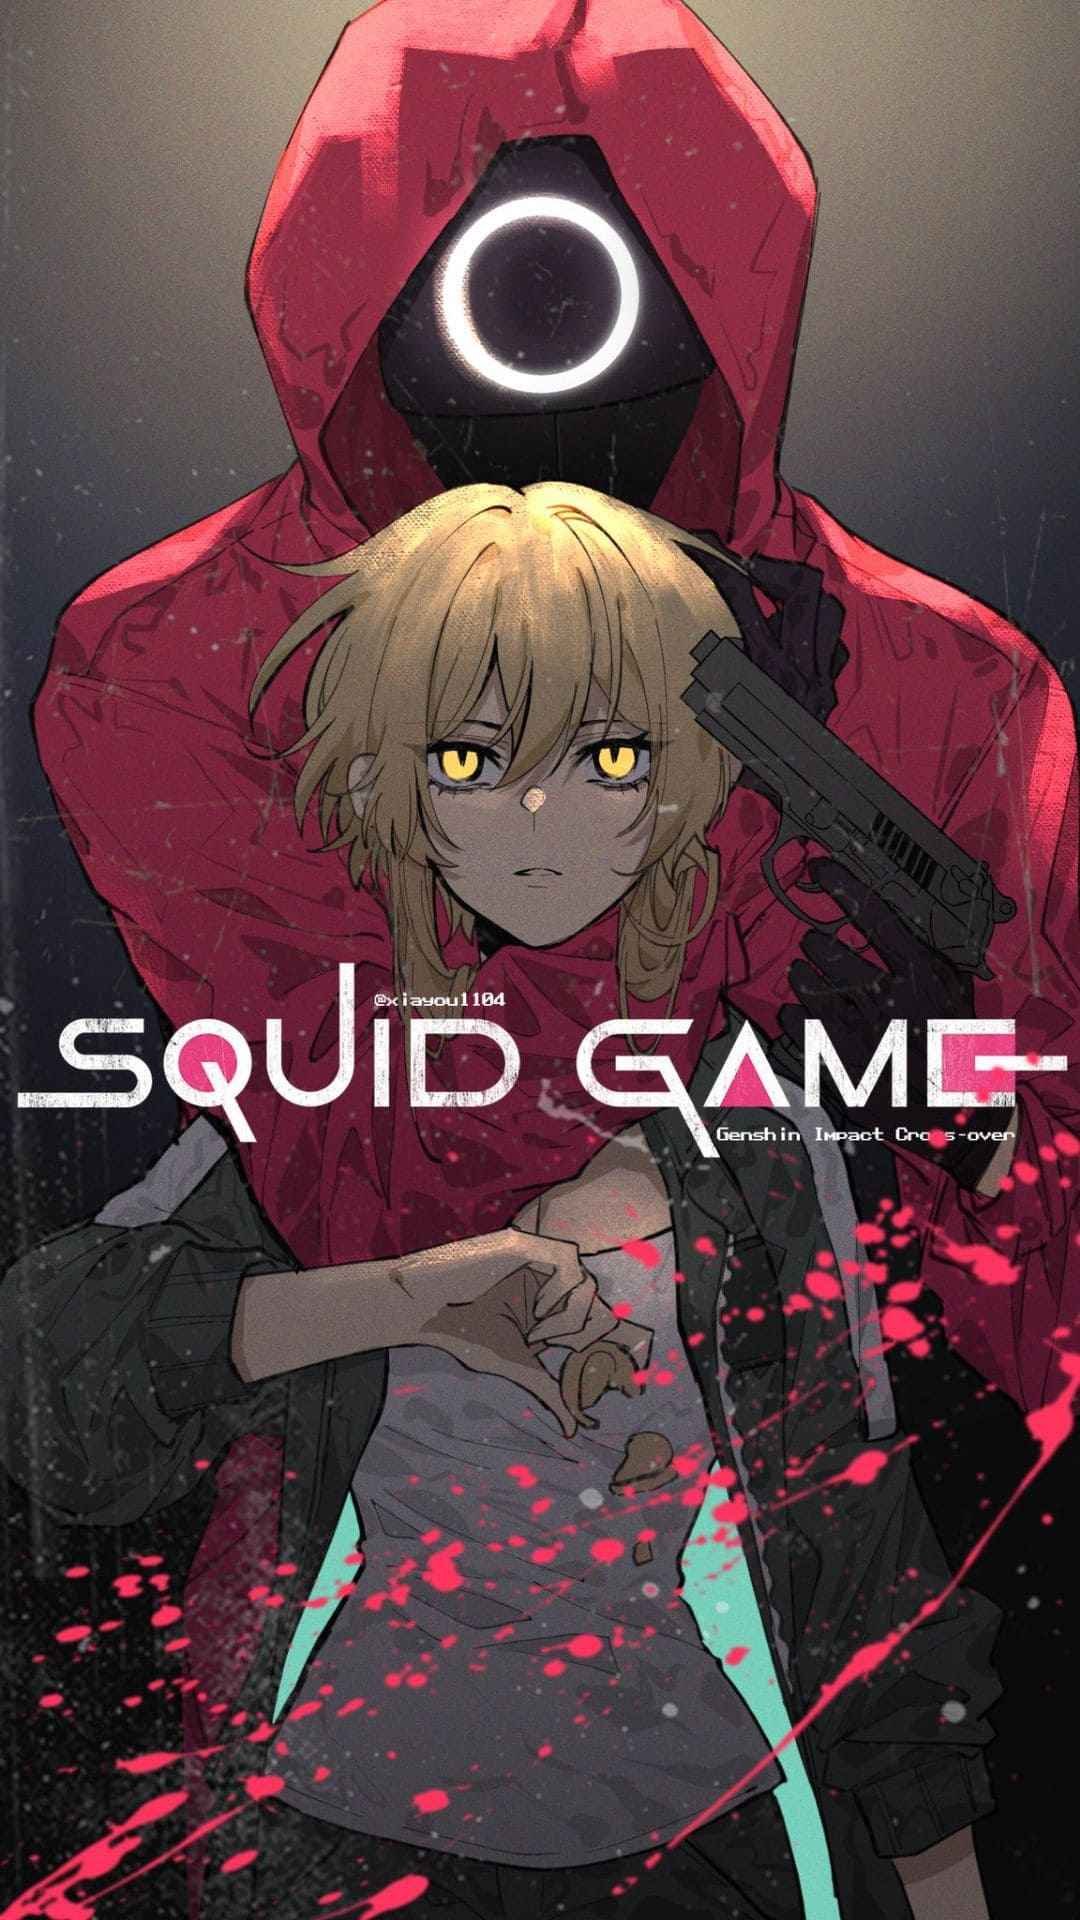 4K Squid Game Wallpaper Android iPhone wallpapers